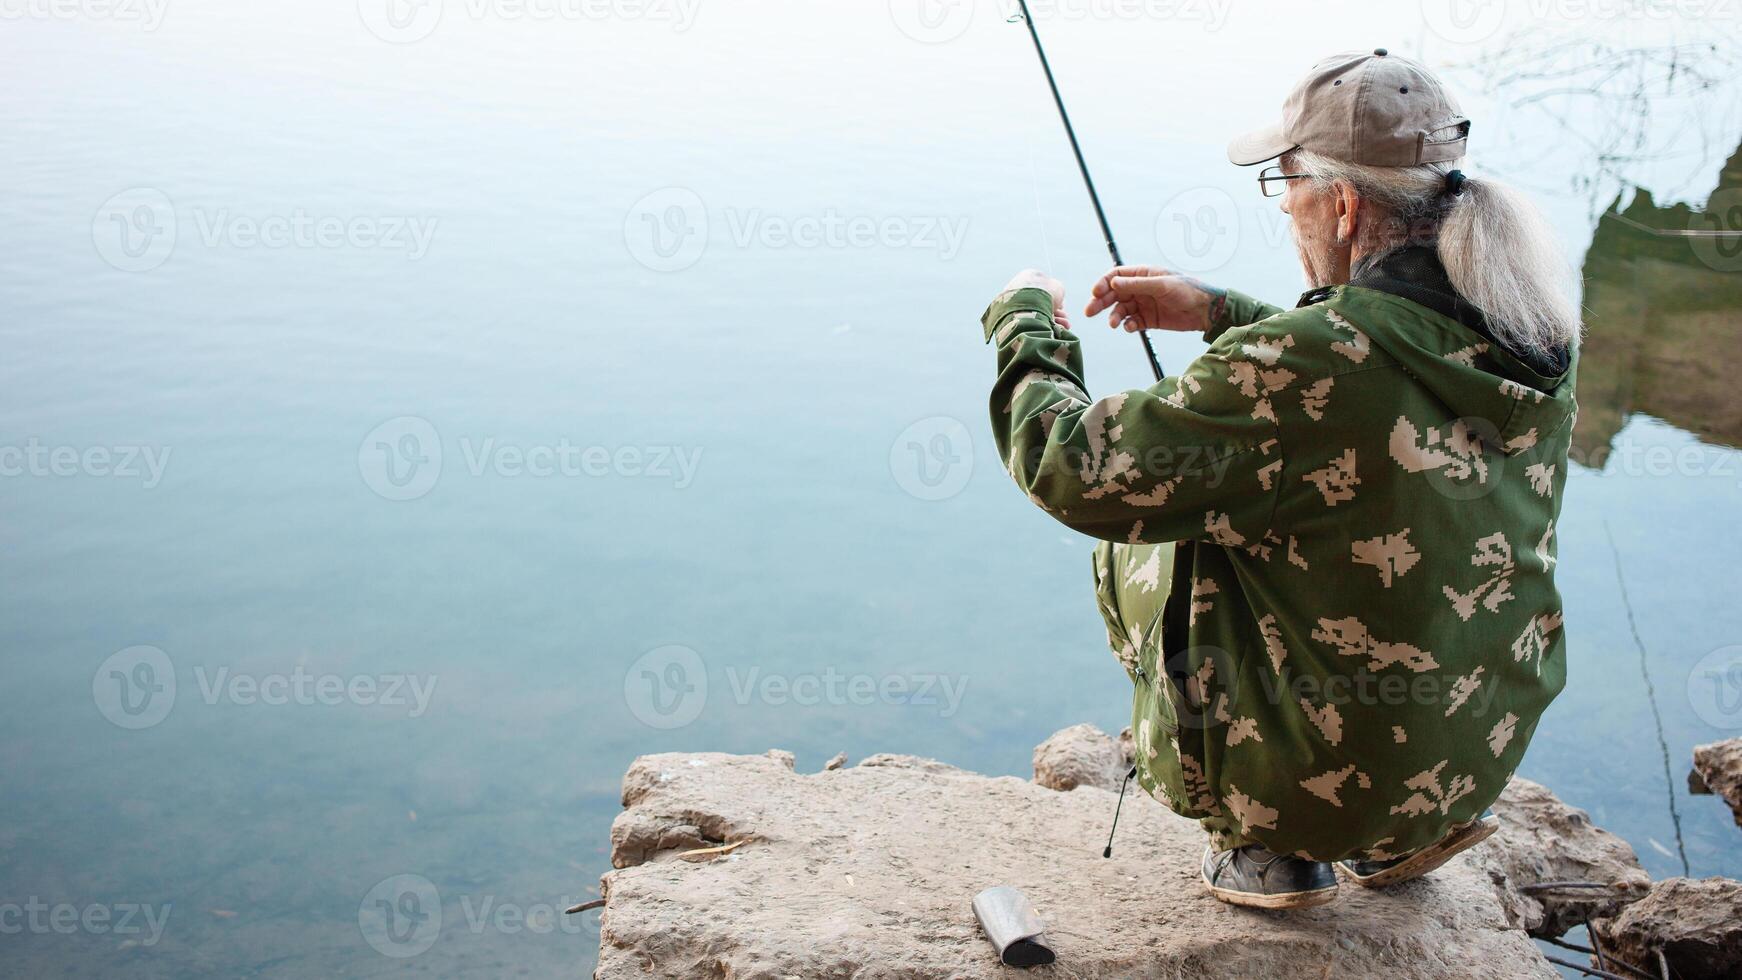 eldest on bank of river, a man with a fishing rod fishing